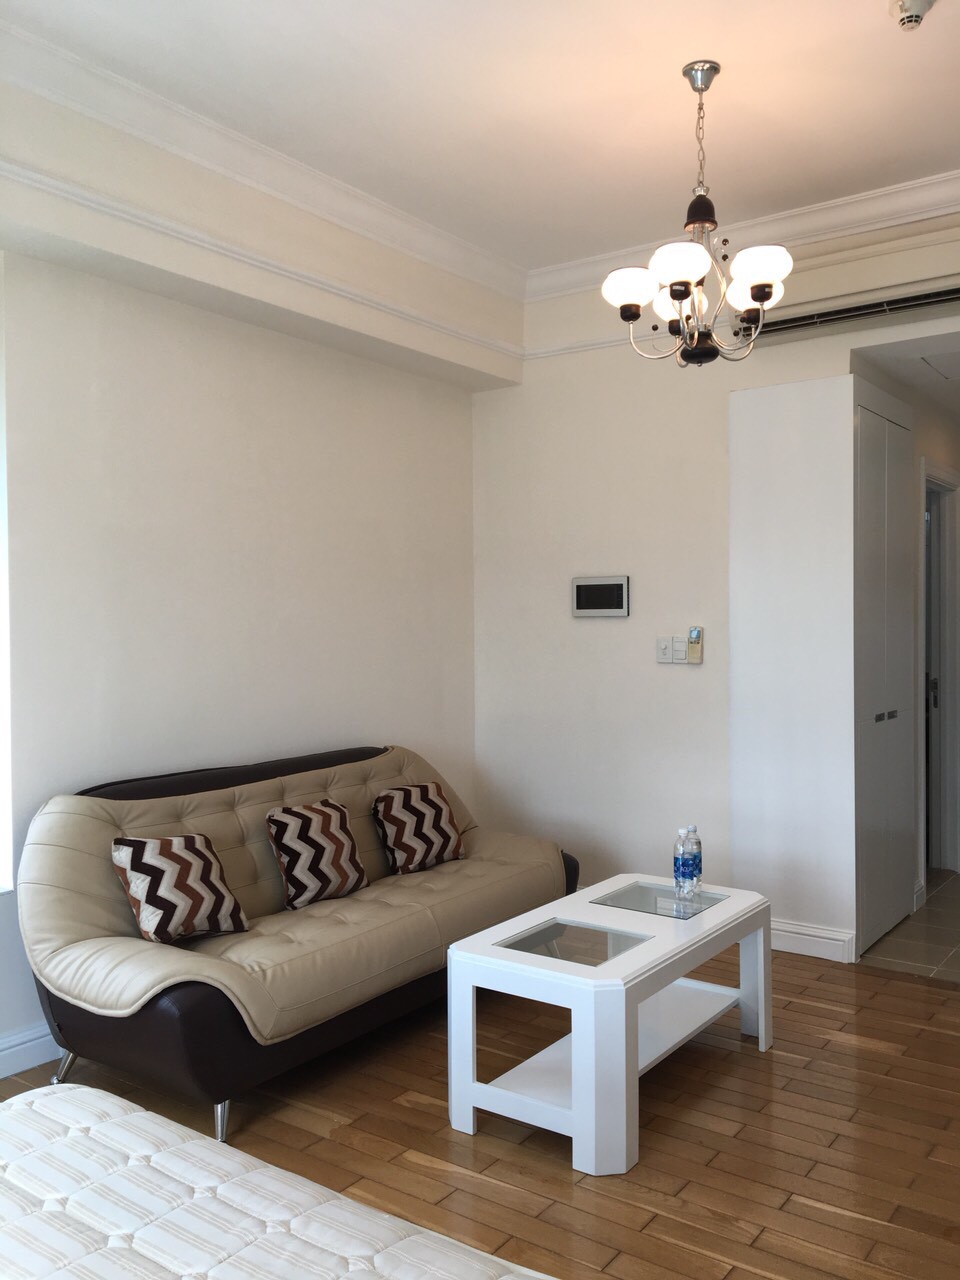 High-class furnished Studio in Binh Thanh District for rent